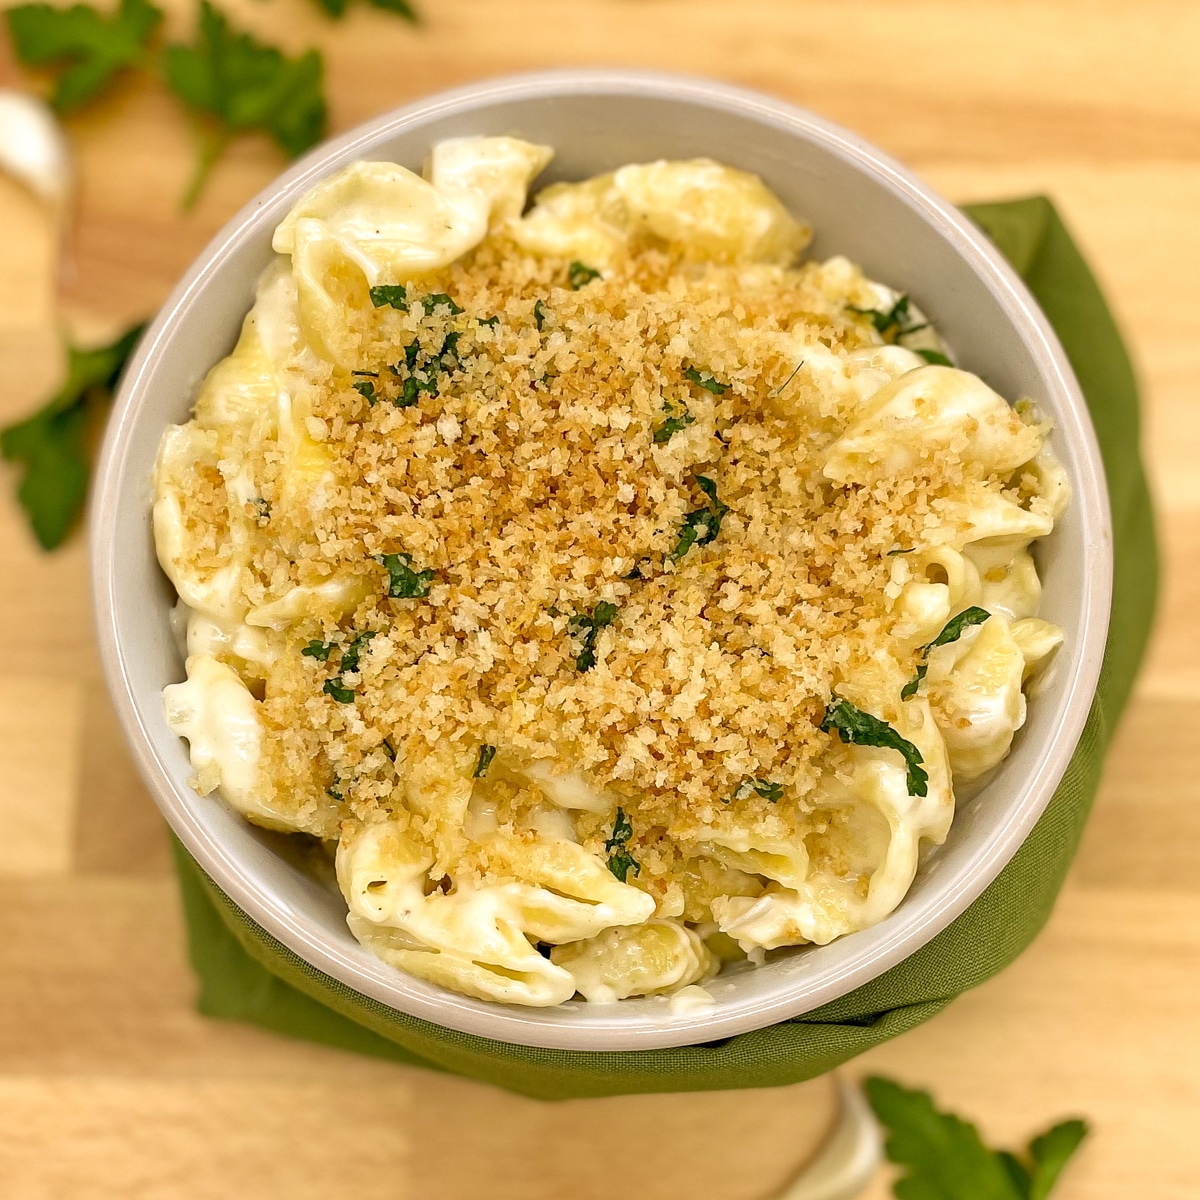 Mac and cheese without milk with a toasted bread crumb and parsley topping on a wooden cutting board with a green napkin, parsley and garlic cloves.